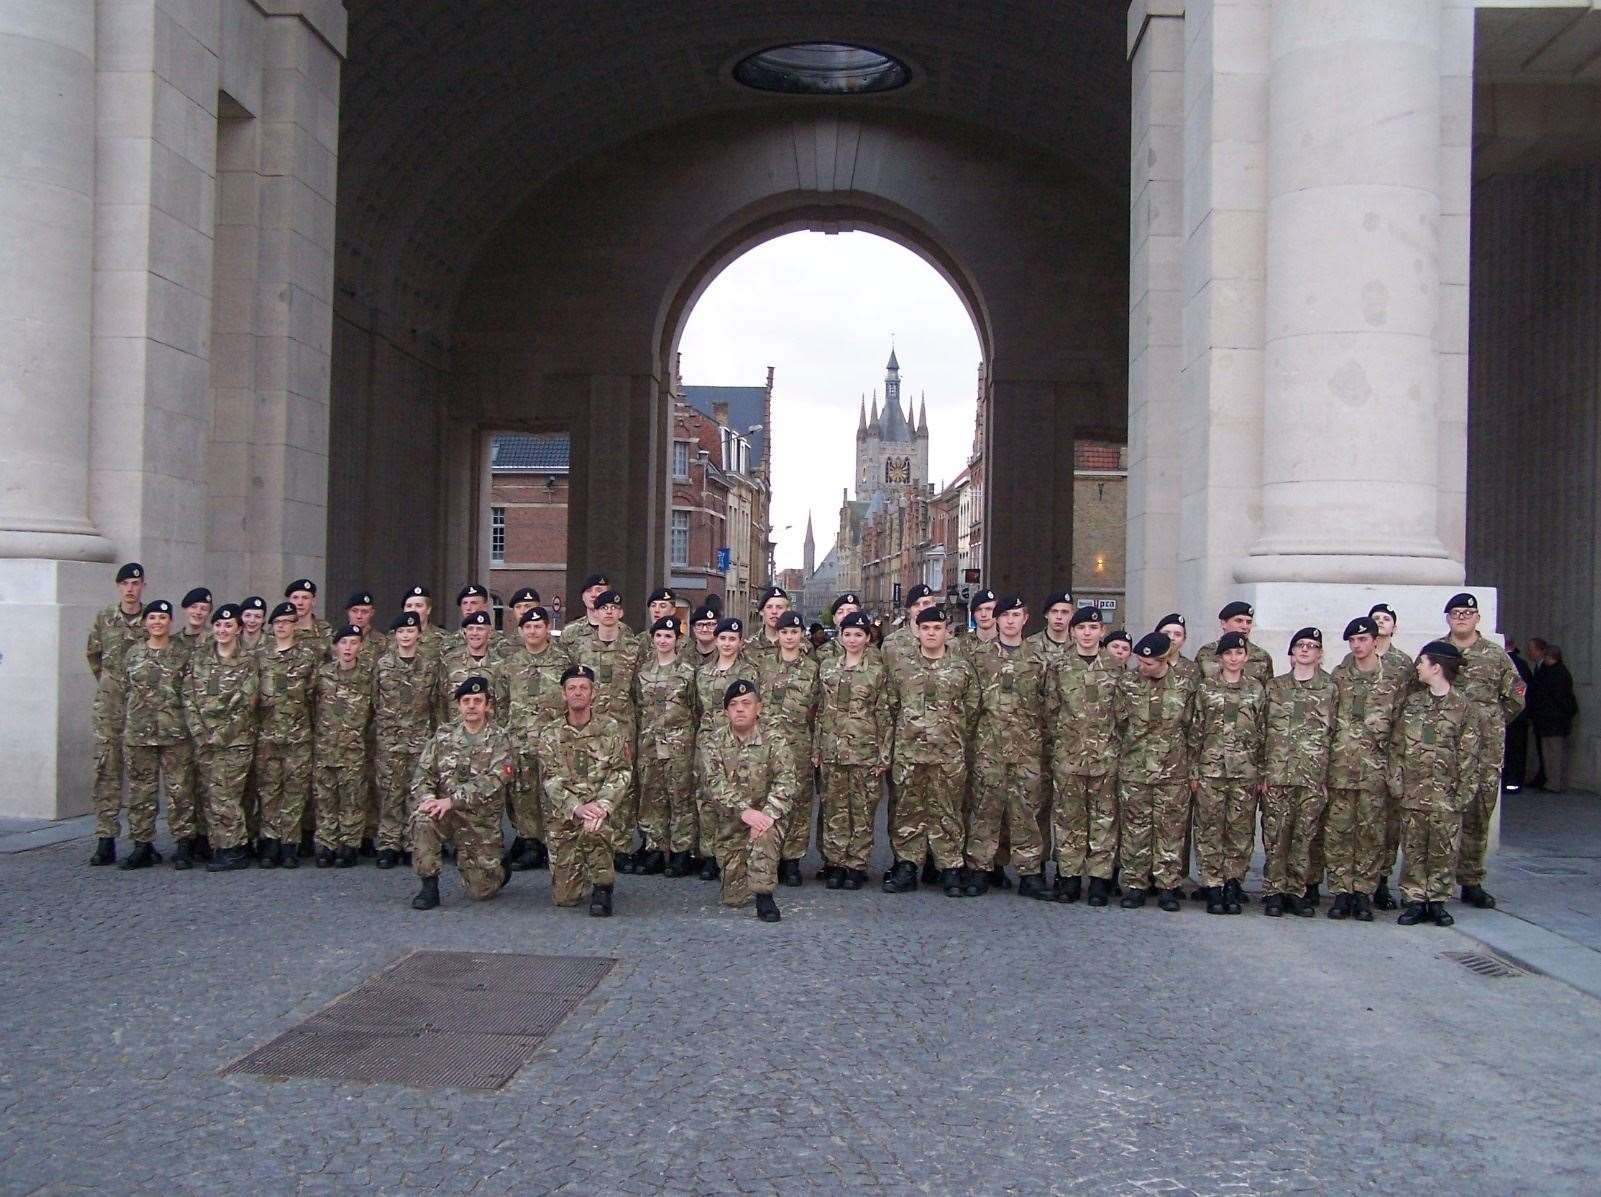 Major Keith Bloor, front centre kneeling, has volunteered with the army cadets for 52 years